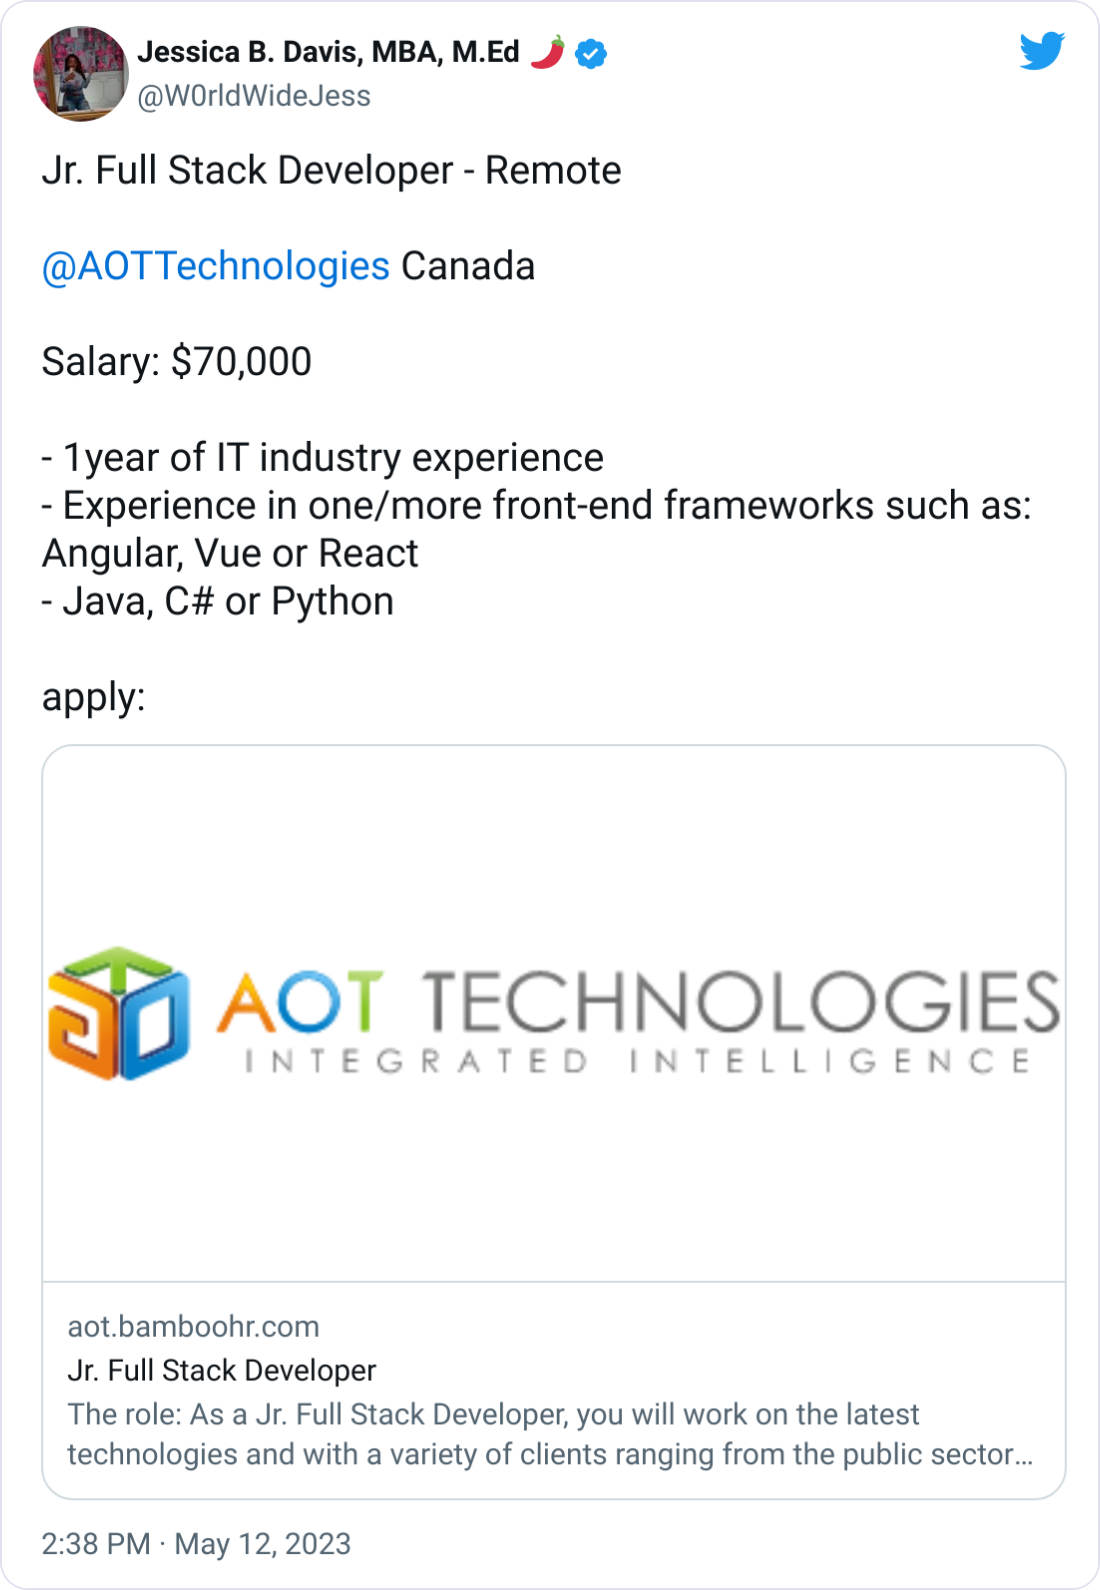 Jessica B. Davis, MBA, M.Ed 🌶 @W0rldWideJess Jr. Full Stack Developer - Remote   @AOTTechnologies  Canada  Salary: $70,000  - 1year of IT industry experience - Experience in one/more front-end frameworks such as: Angular, Vue or React - Java, C# or Python  apply: